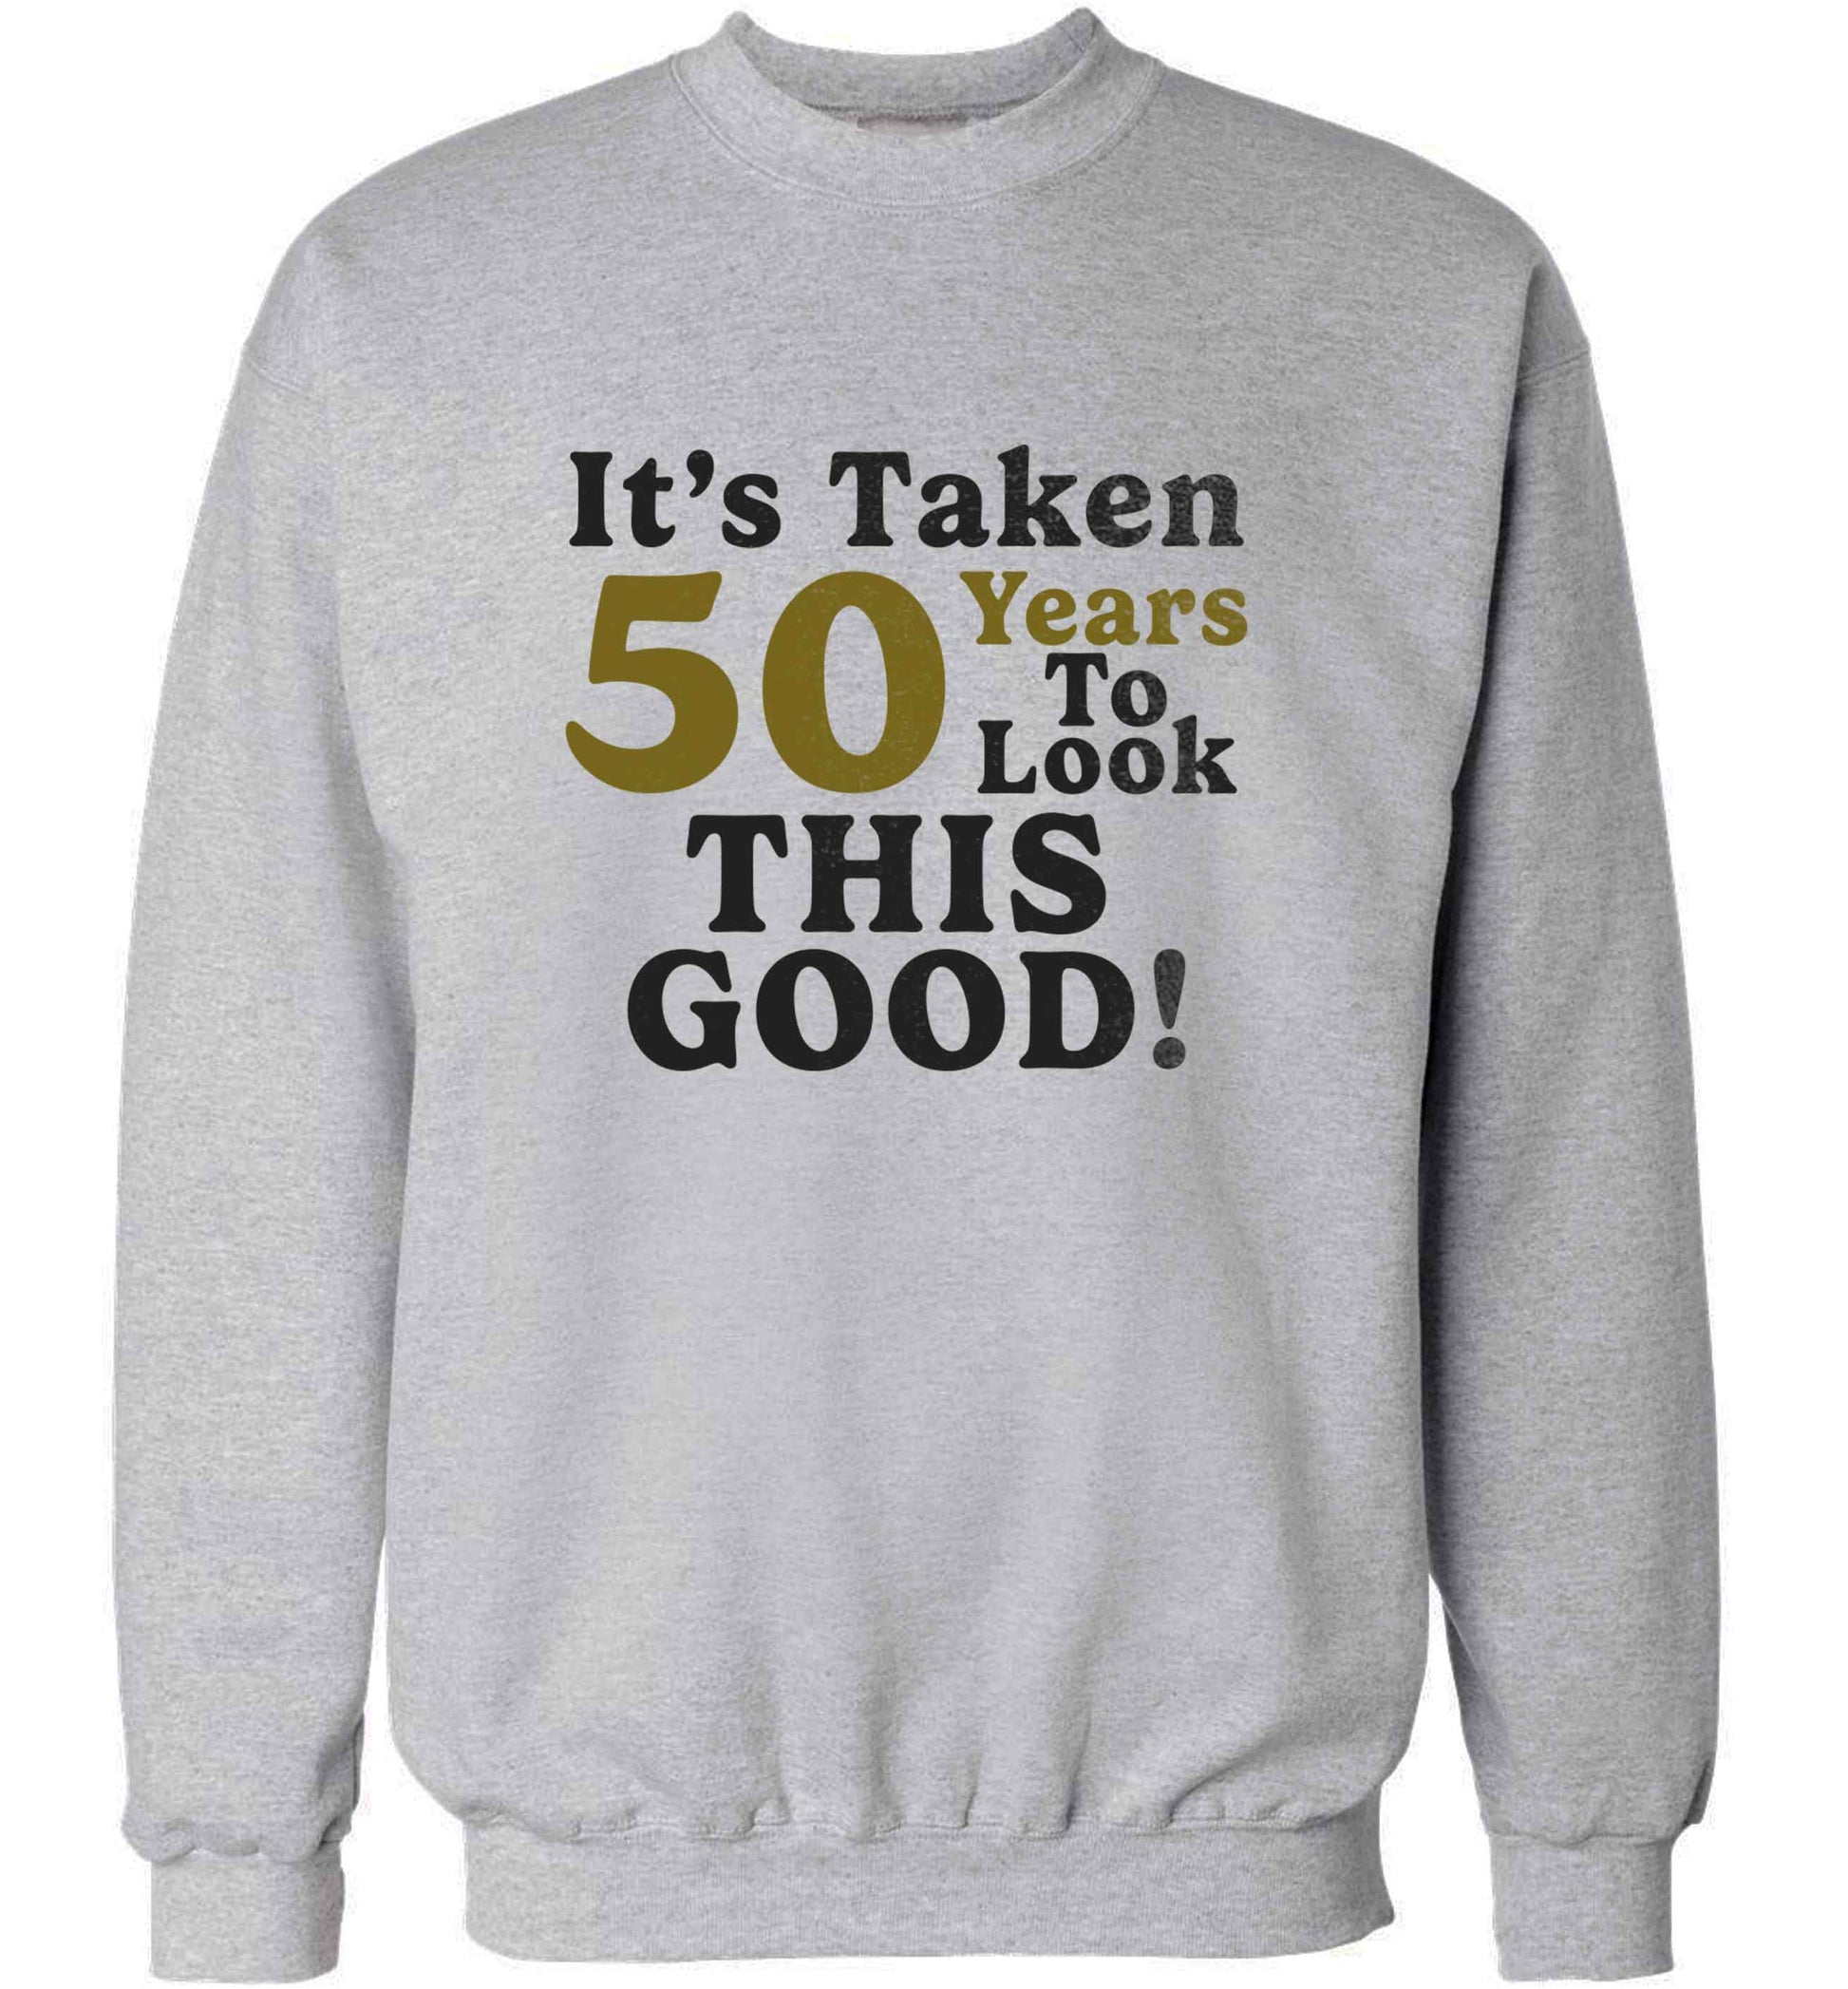 It's taken 50 years to look this good! adult's unisex grey sweater 2XL